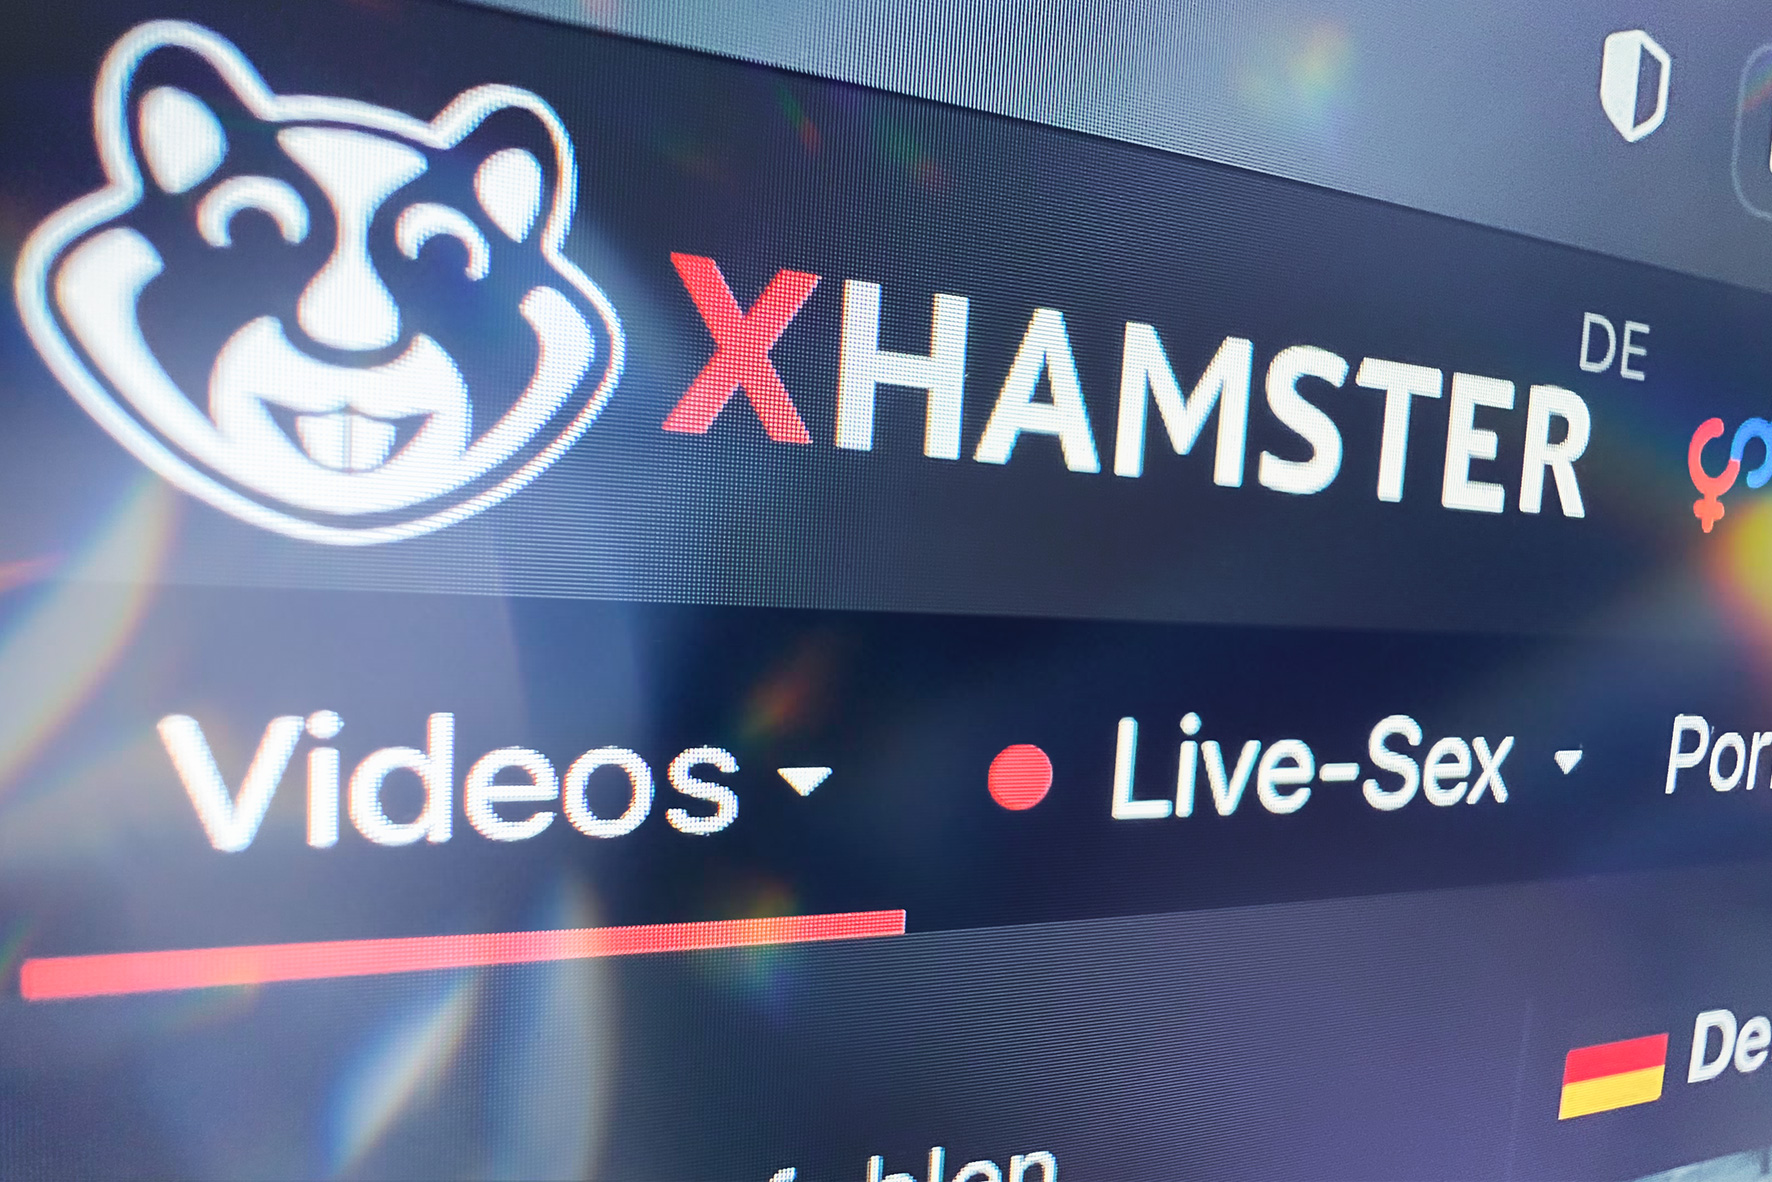 amir azuan share xhamstervideodownloader apk for android download 2018 photos